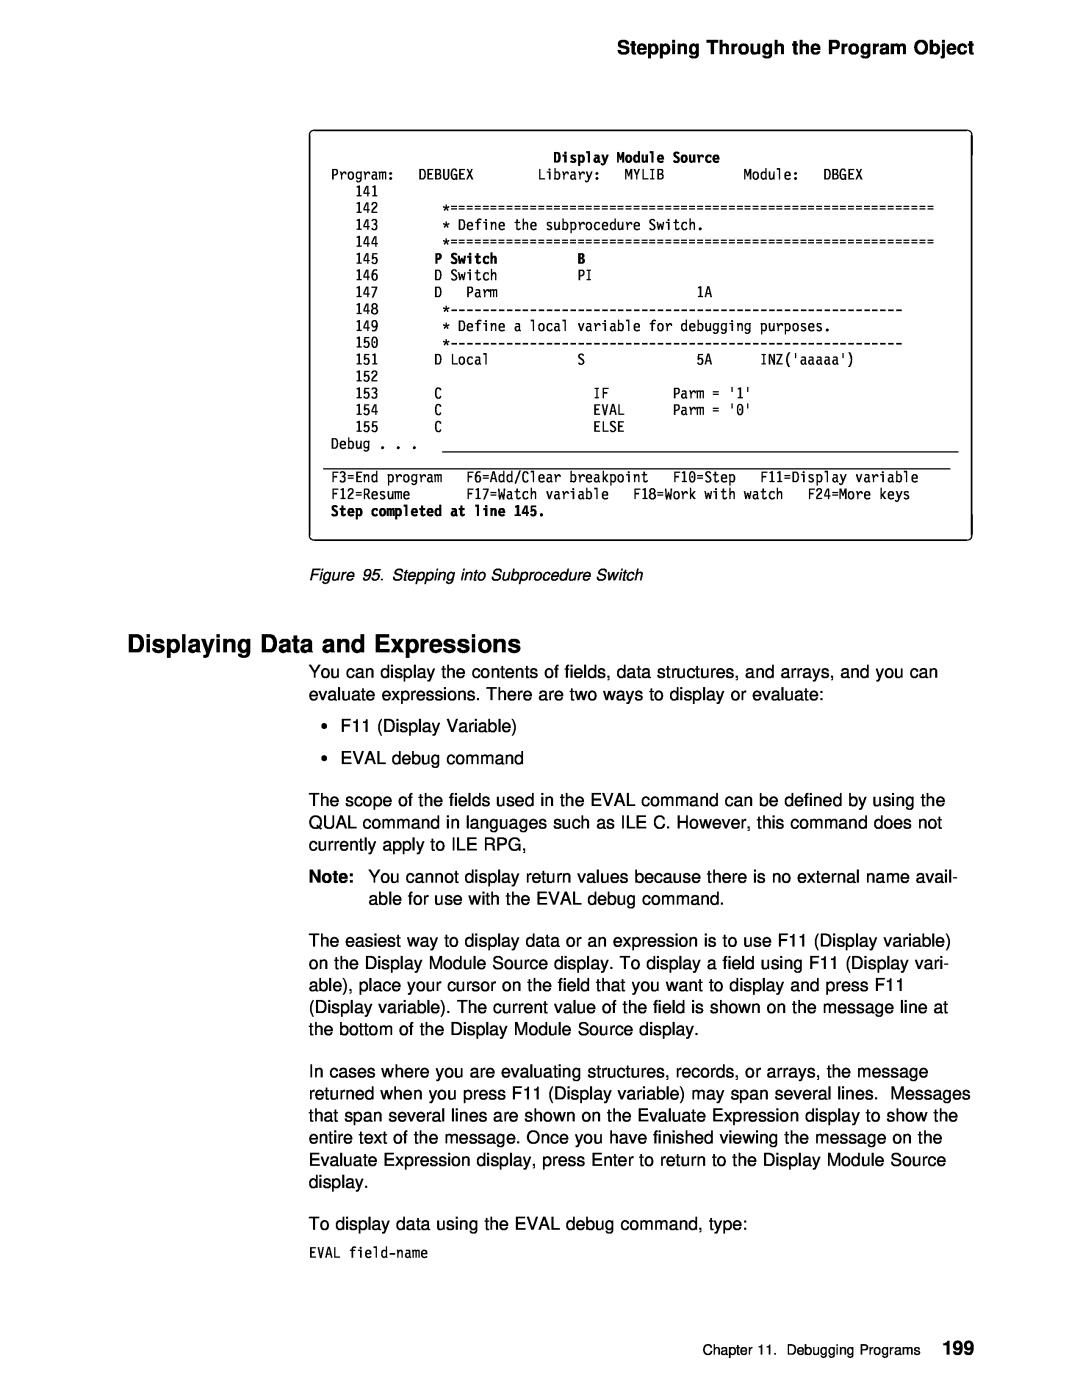 IBM AS/400 manual Displaying Data and Expressions, Stepping Through the Program Object, Stepping into Subprocedure Switch 